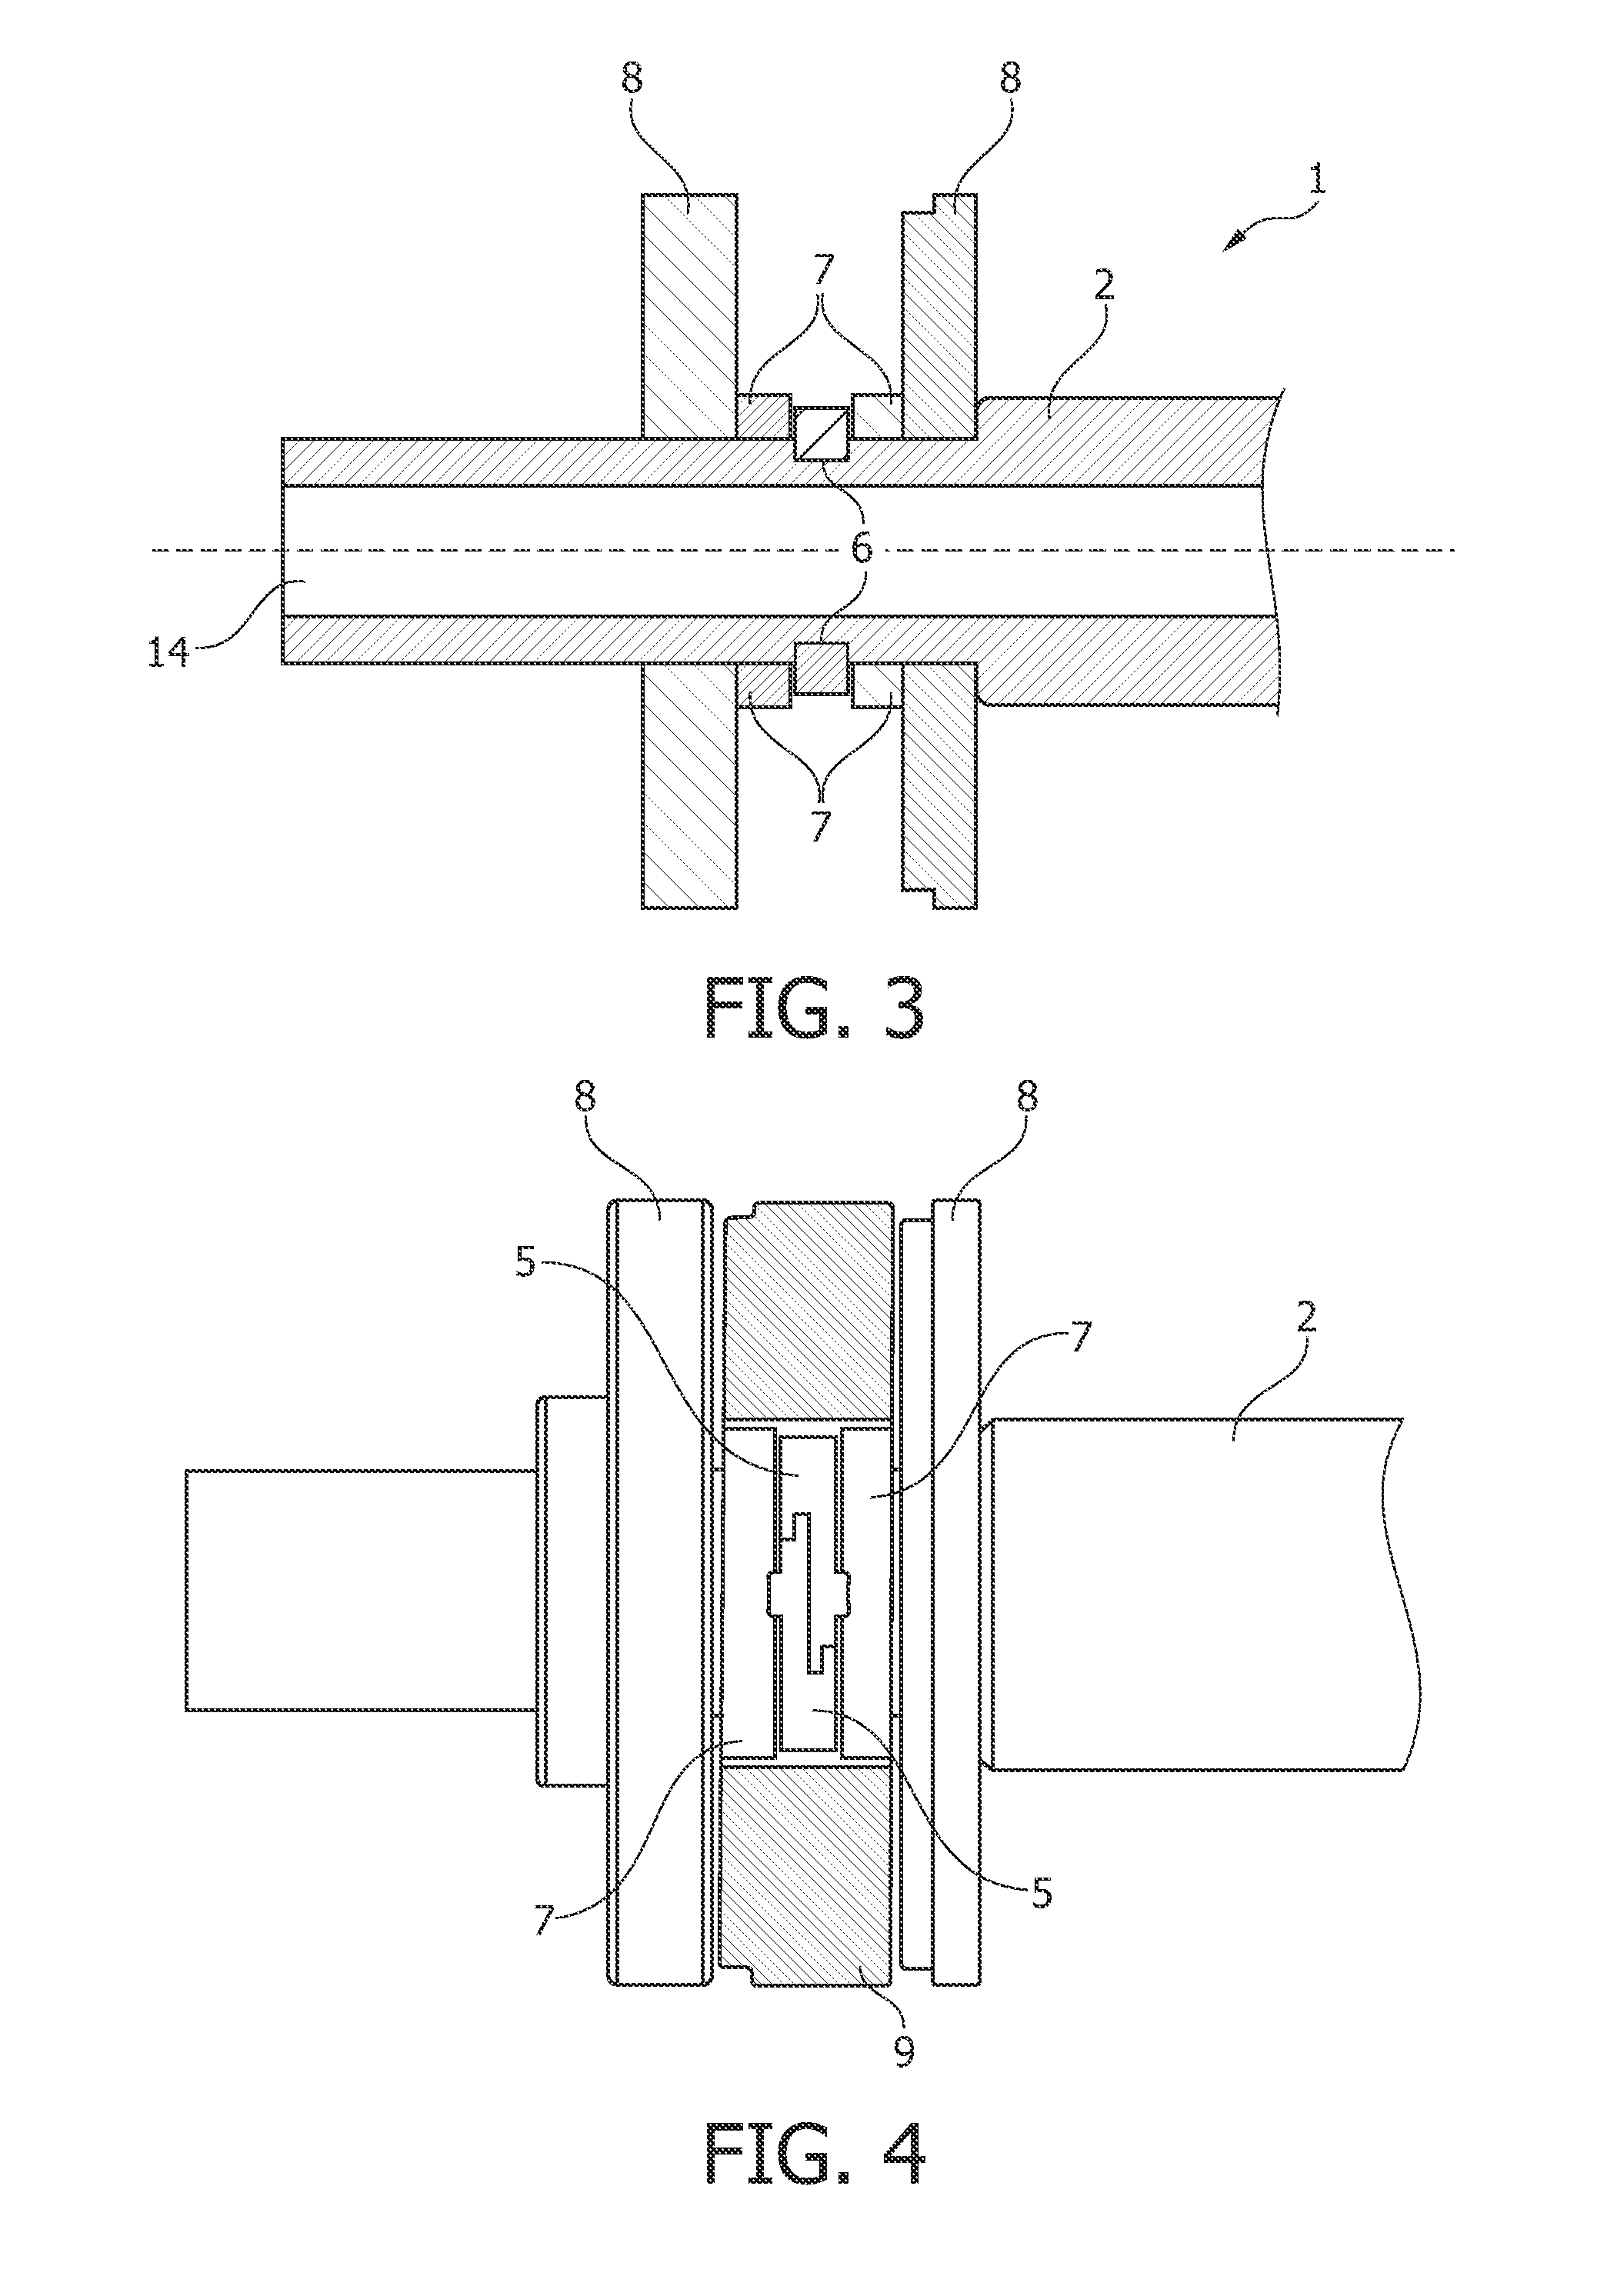 Bearing system for a rotary anode of an x-ray tube